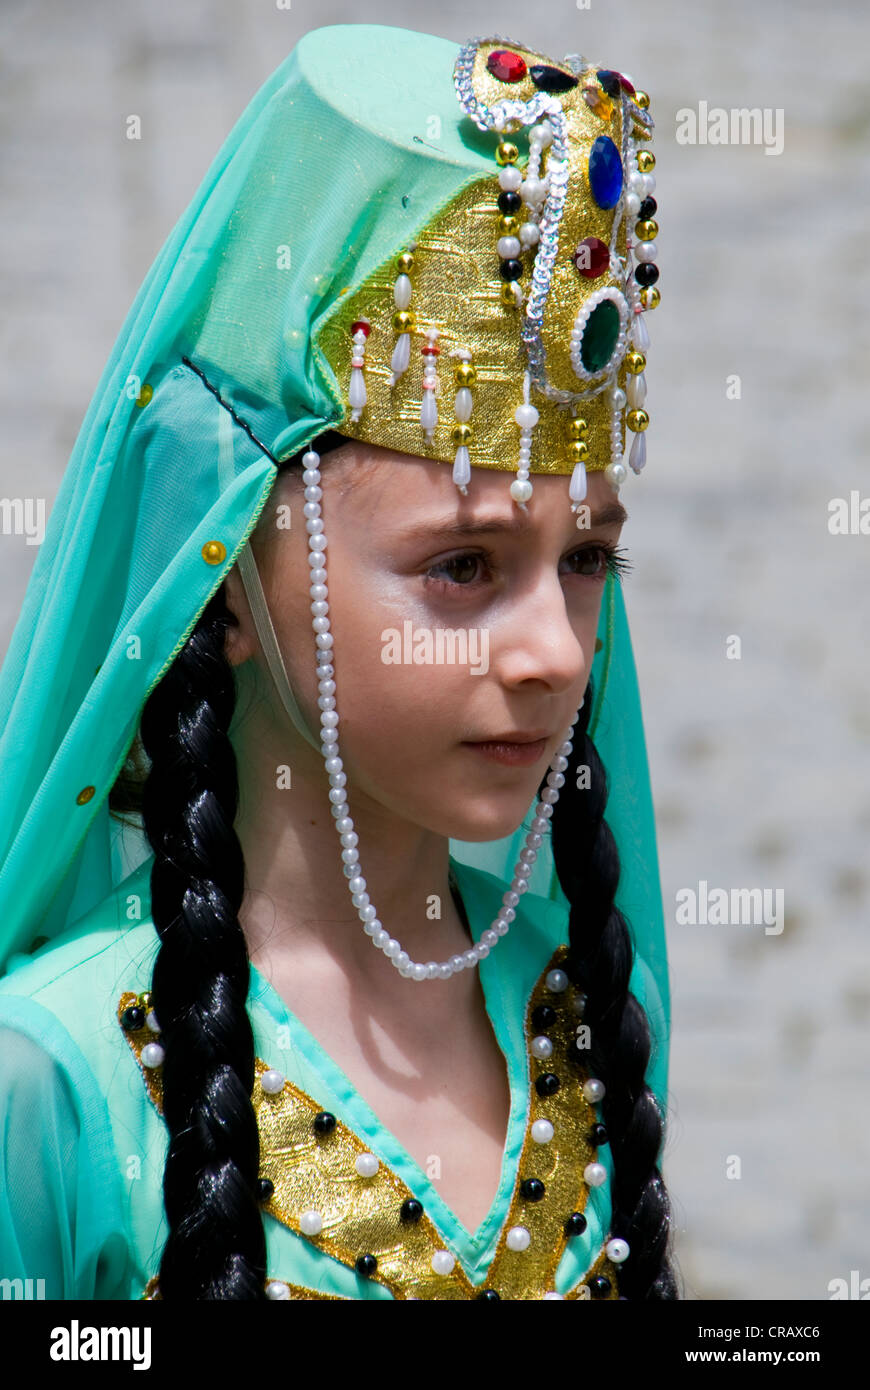 Girl wearing a traditional costume, Sighnaghi, Kakheti province, Georgia, Caucasus region, Middle East Stock Photo